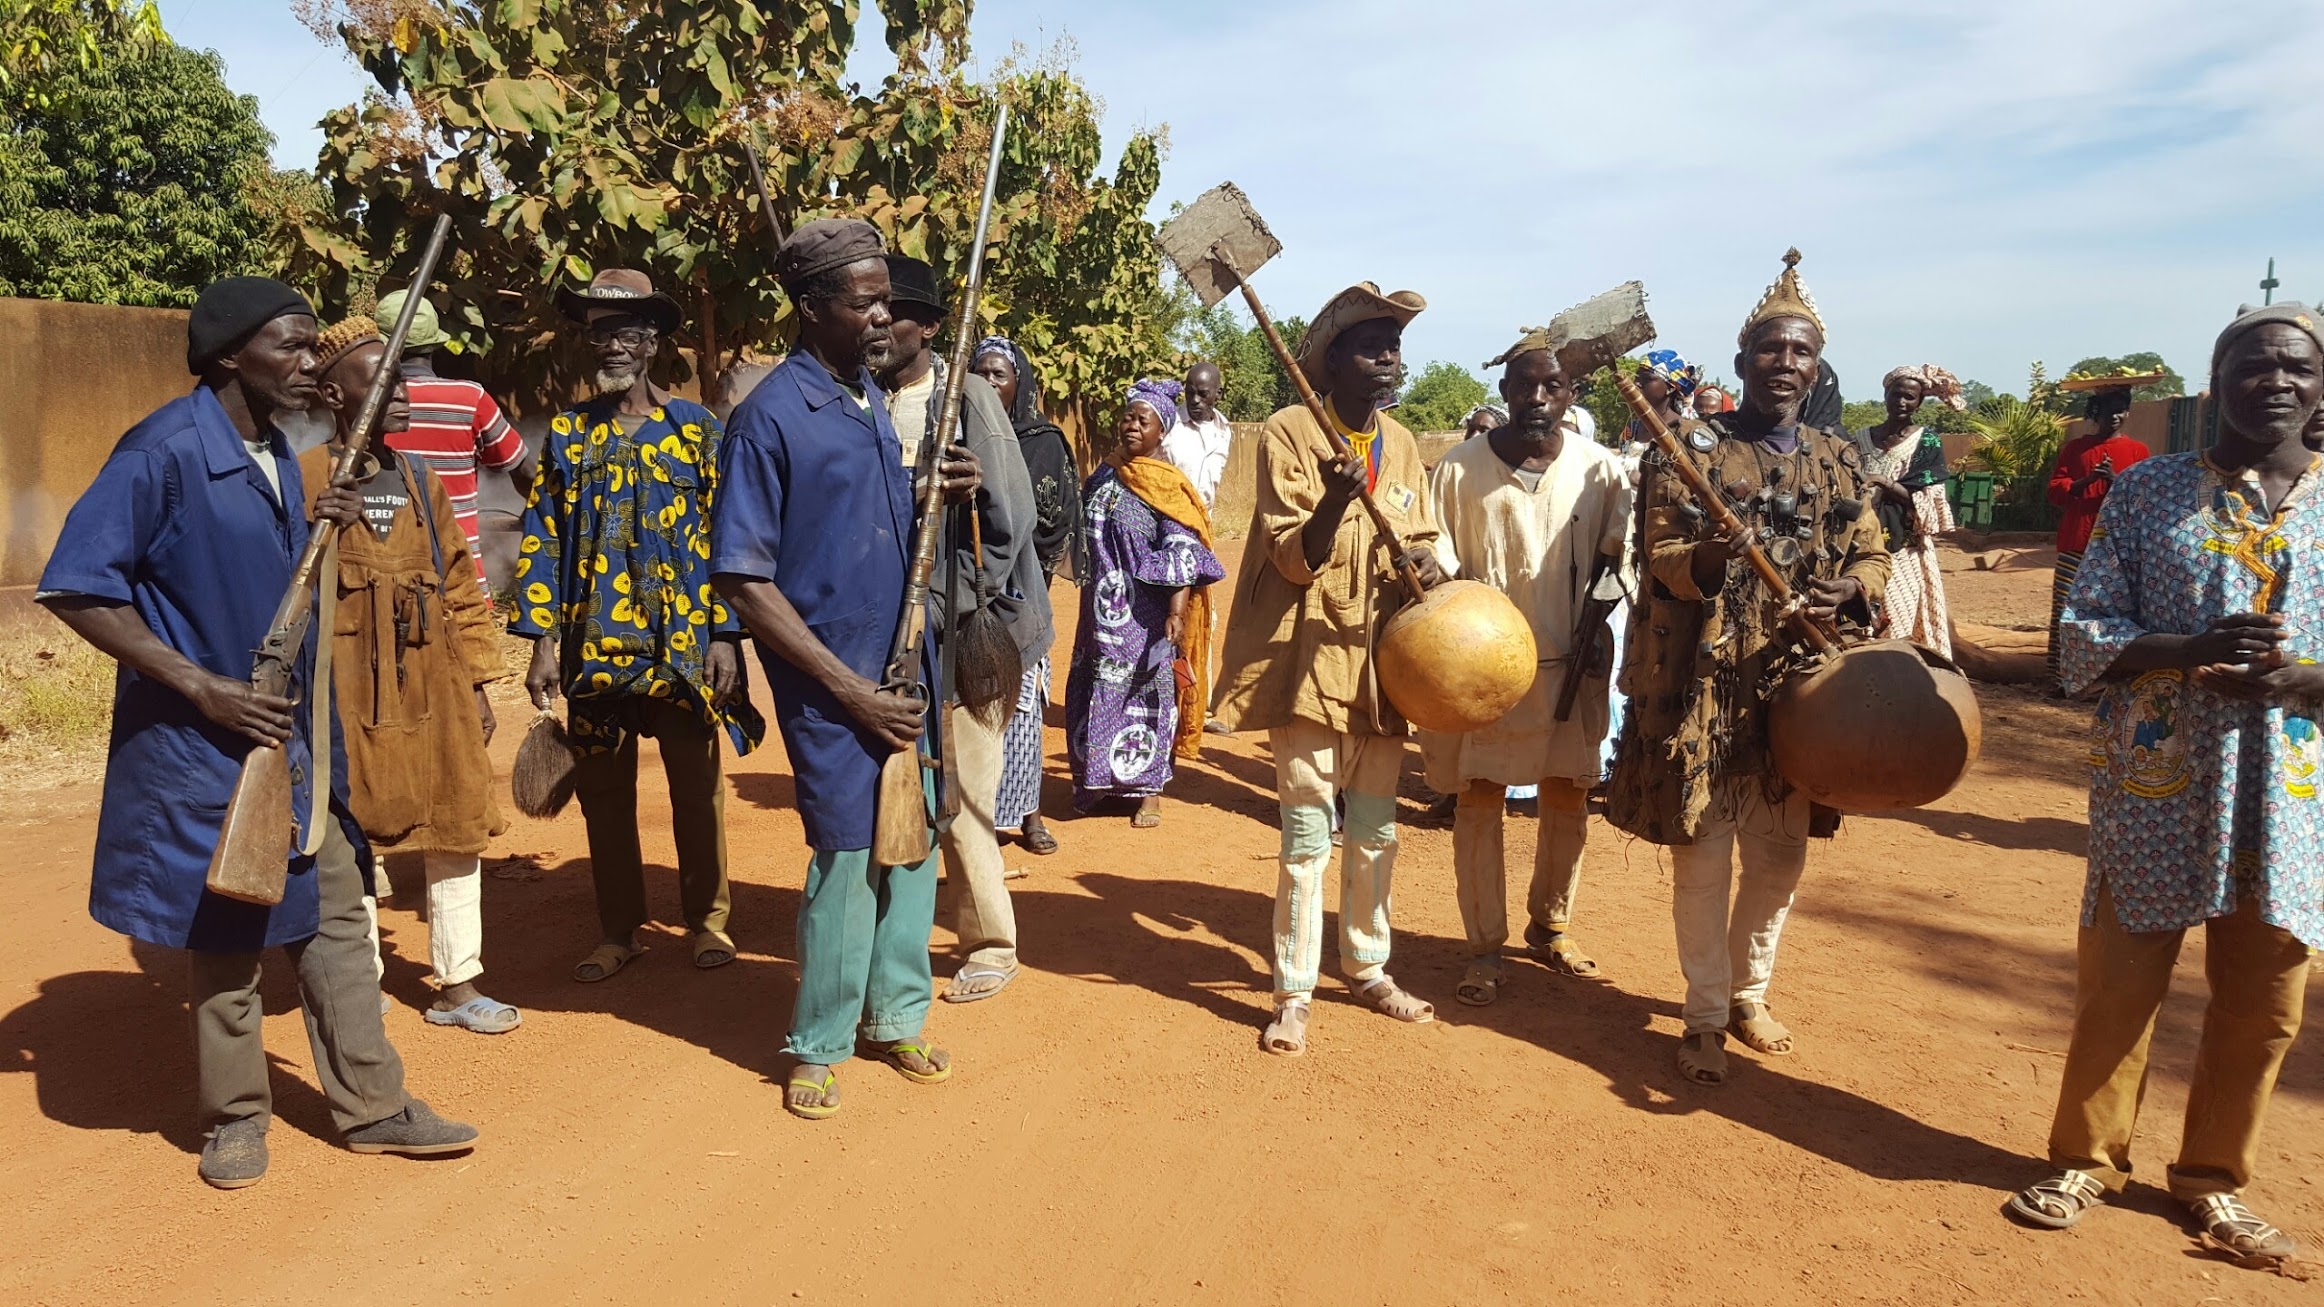 Traditional musicians with their instruments leading a village group on red dust road